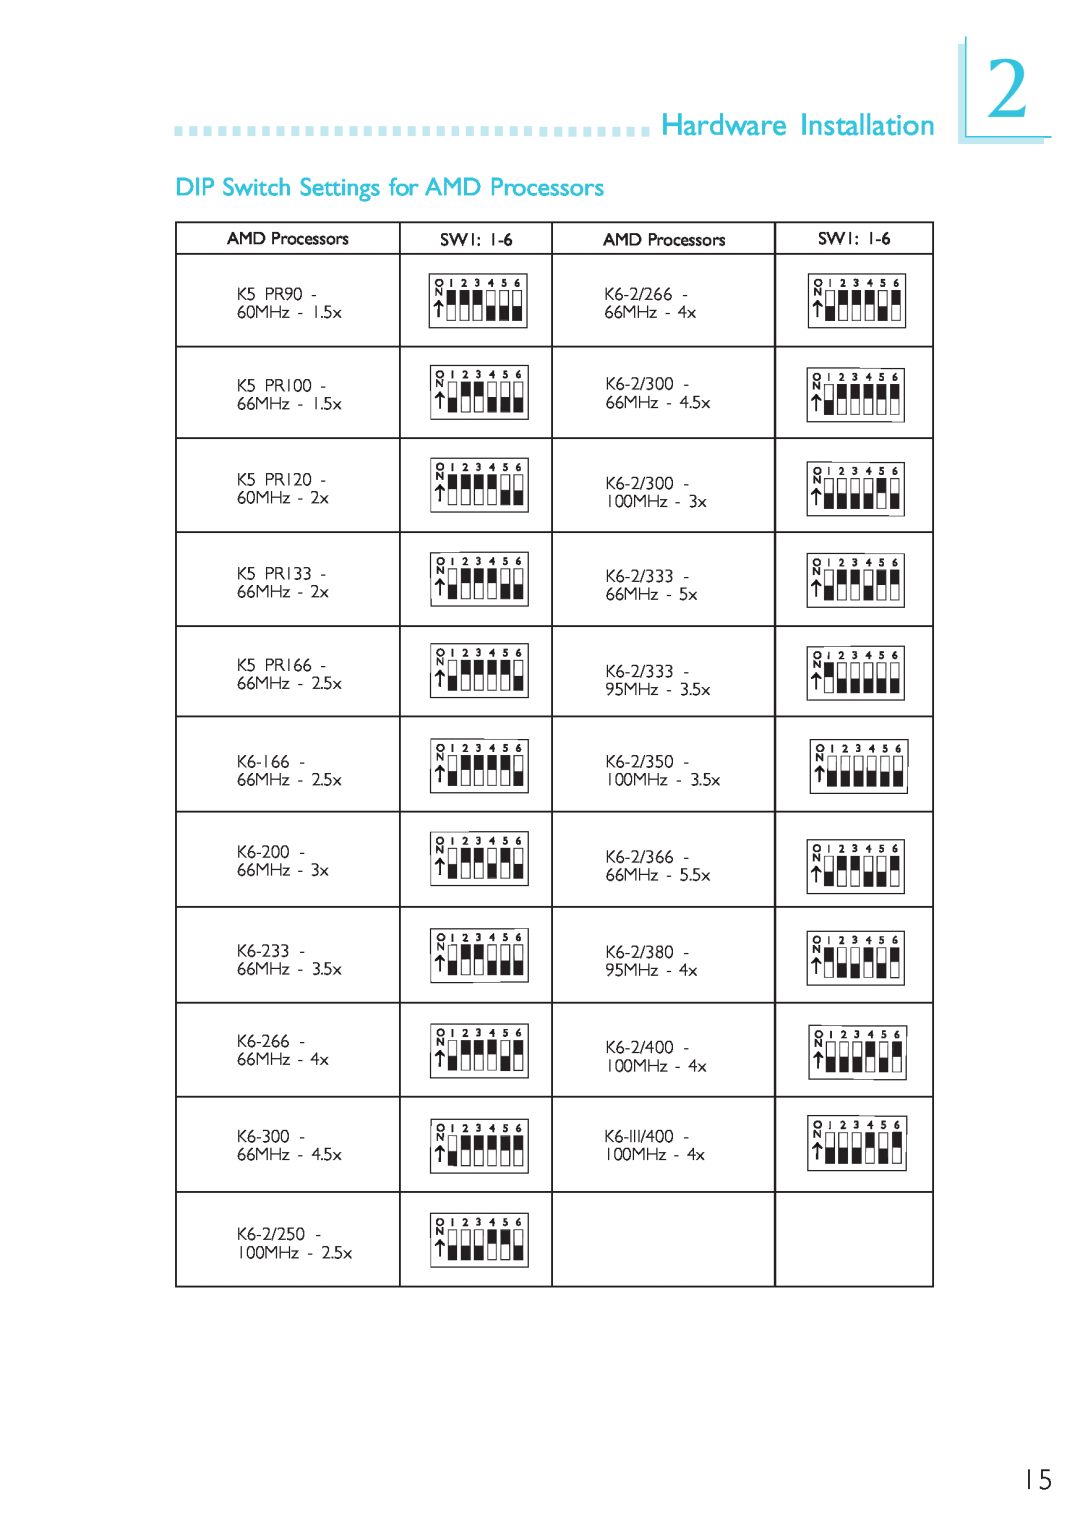 Microsoft G7VP2 manual DIP Switch Settings for AMD Processors, Hardware Installation 